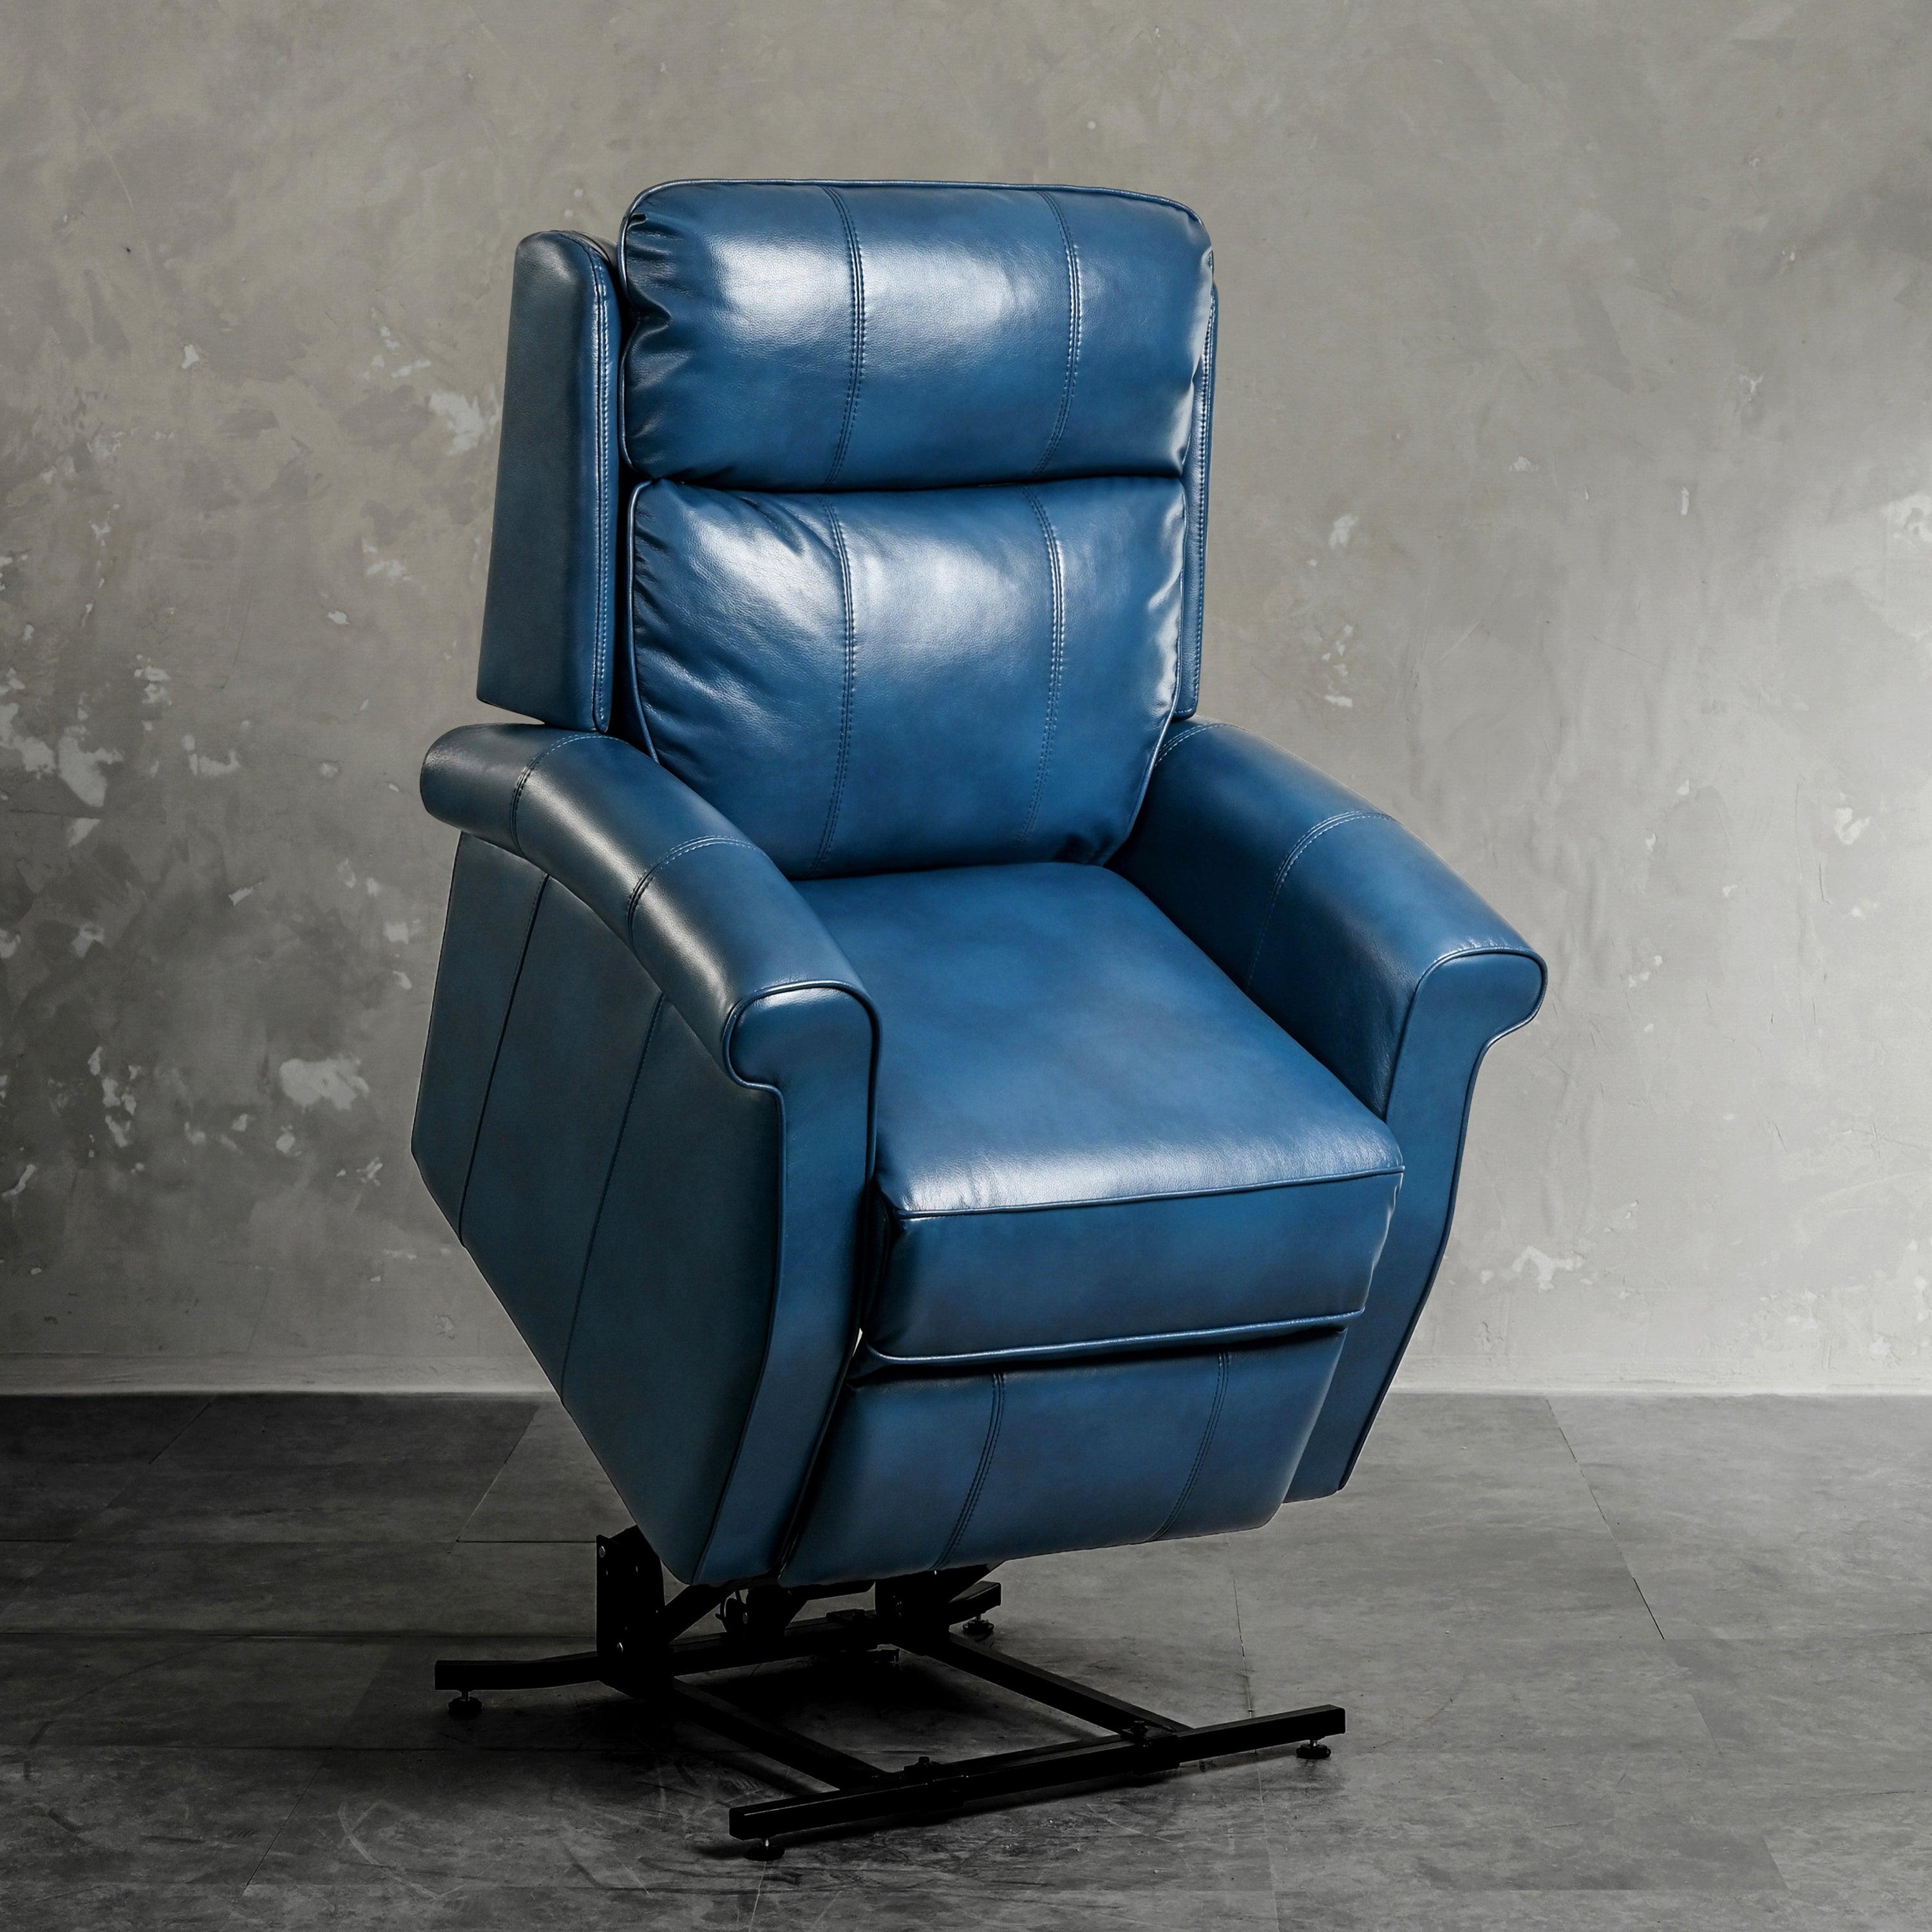 Lift Chair Recliner with Massage and Heat, Blue with Stitching, lifted